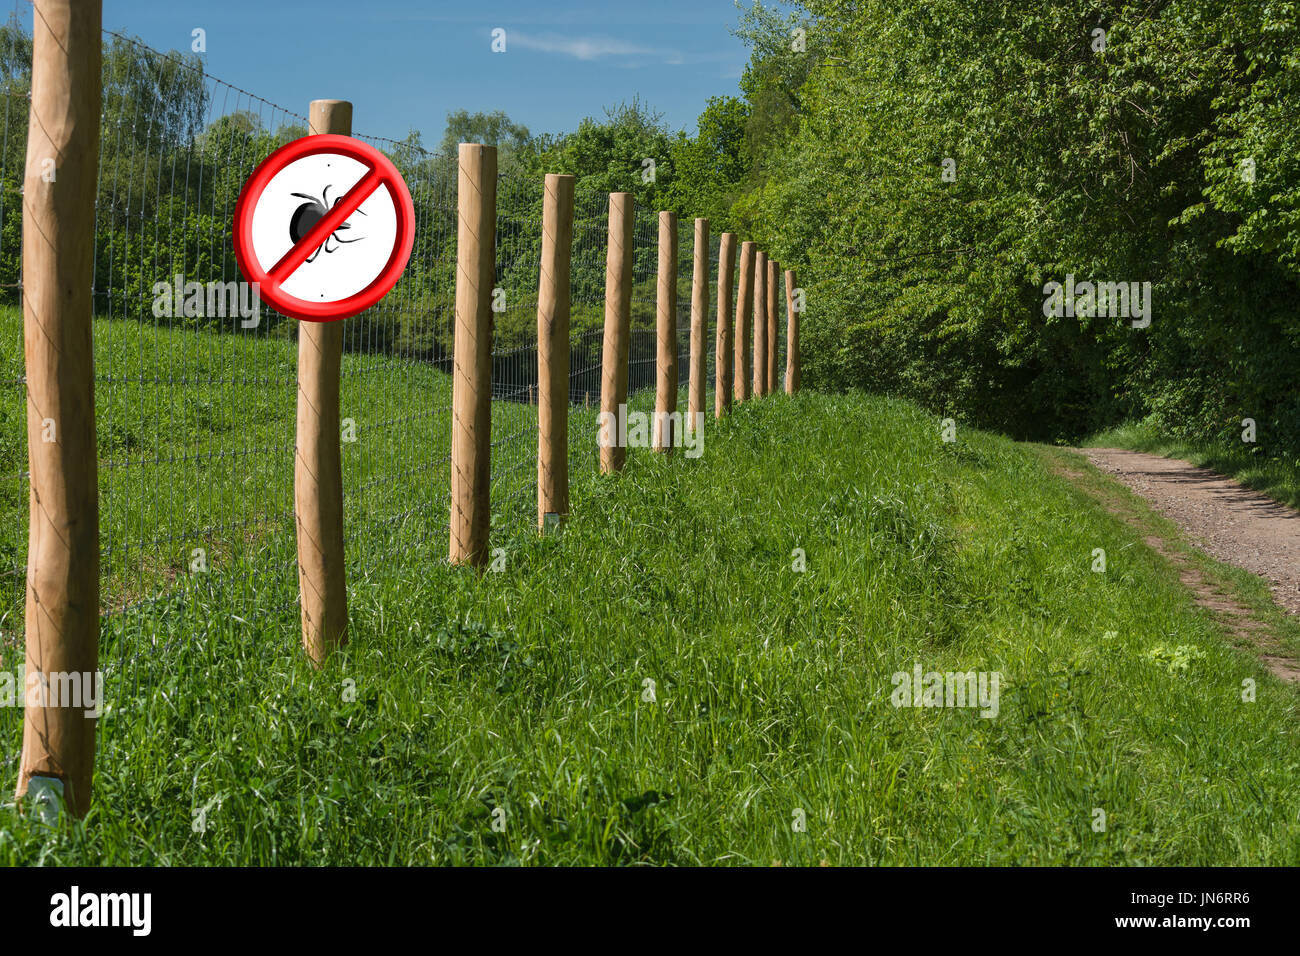 Red shield with crossed out ticks symbol on a fence post in front of a green meadow. Concept Ticks free zone Stock Photo